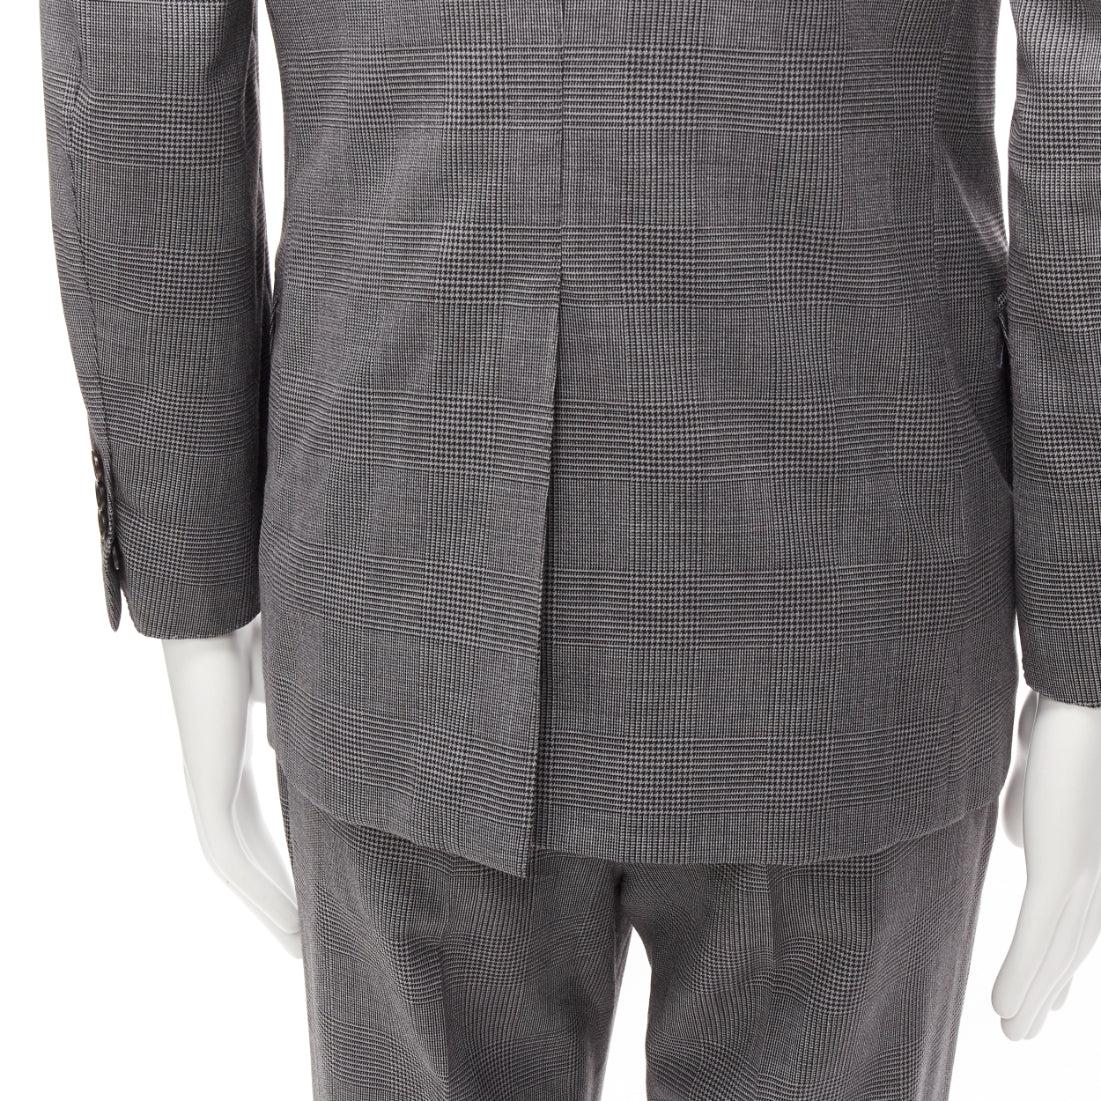 TOM FORD O'Connor grey houndstooth wool blend blazer pants suit set IT46 S For Sale 4